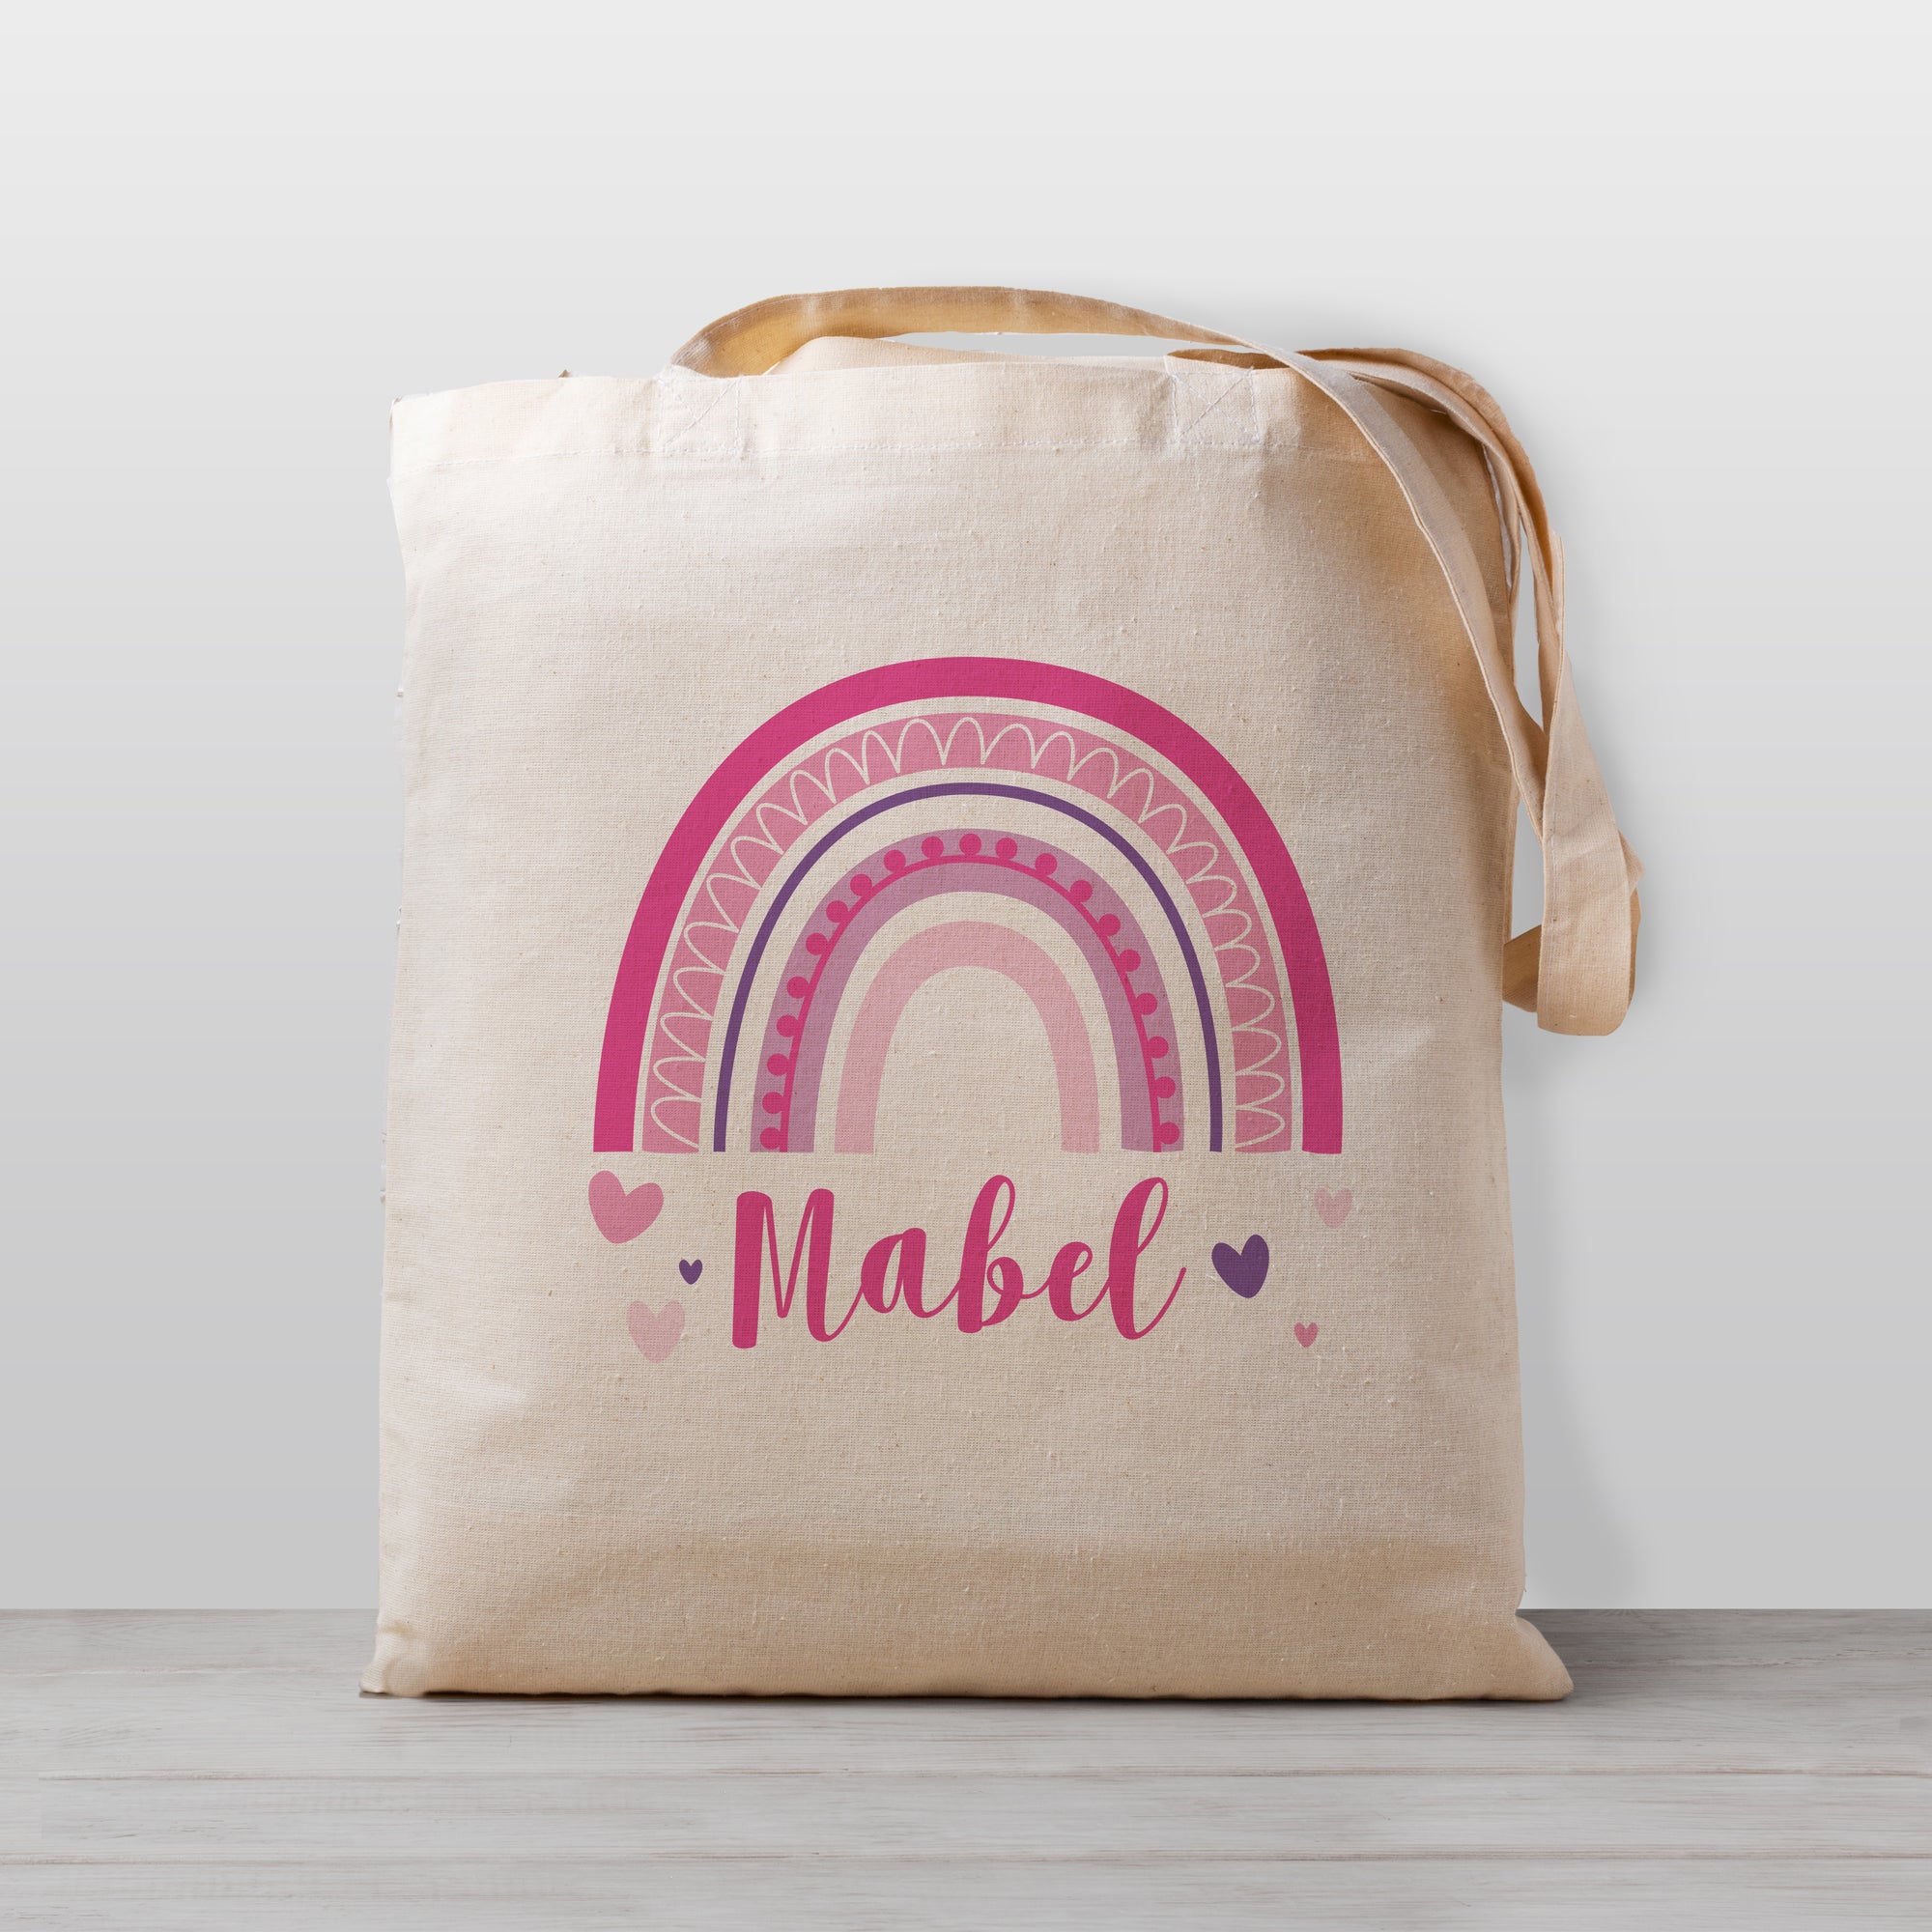 Rainbow Personalized Tote Bag - Pipsy